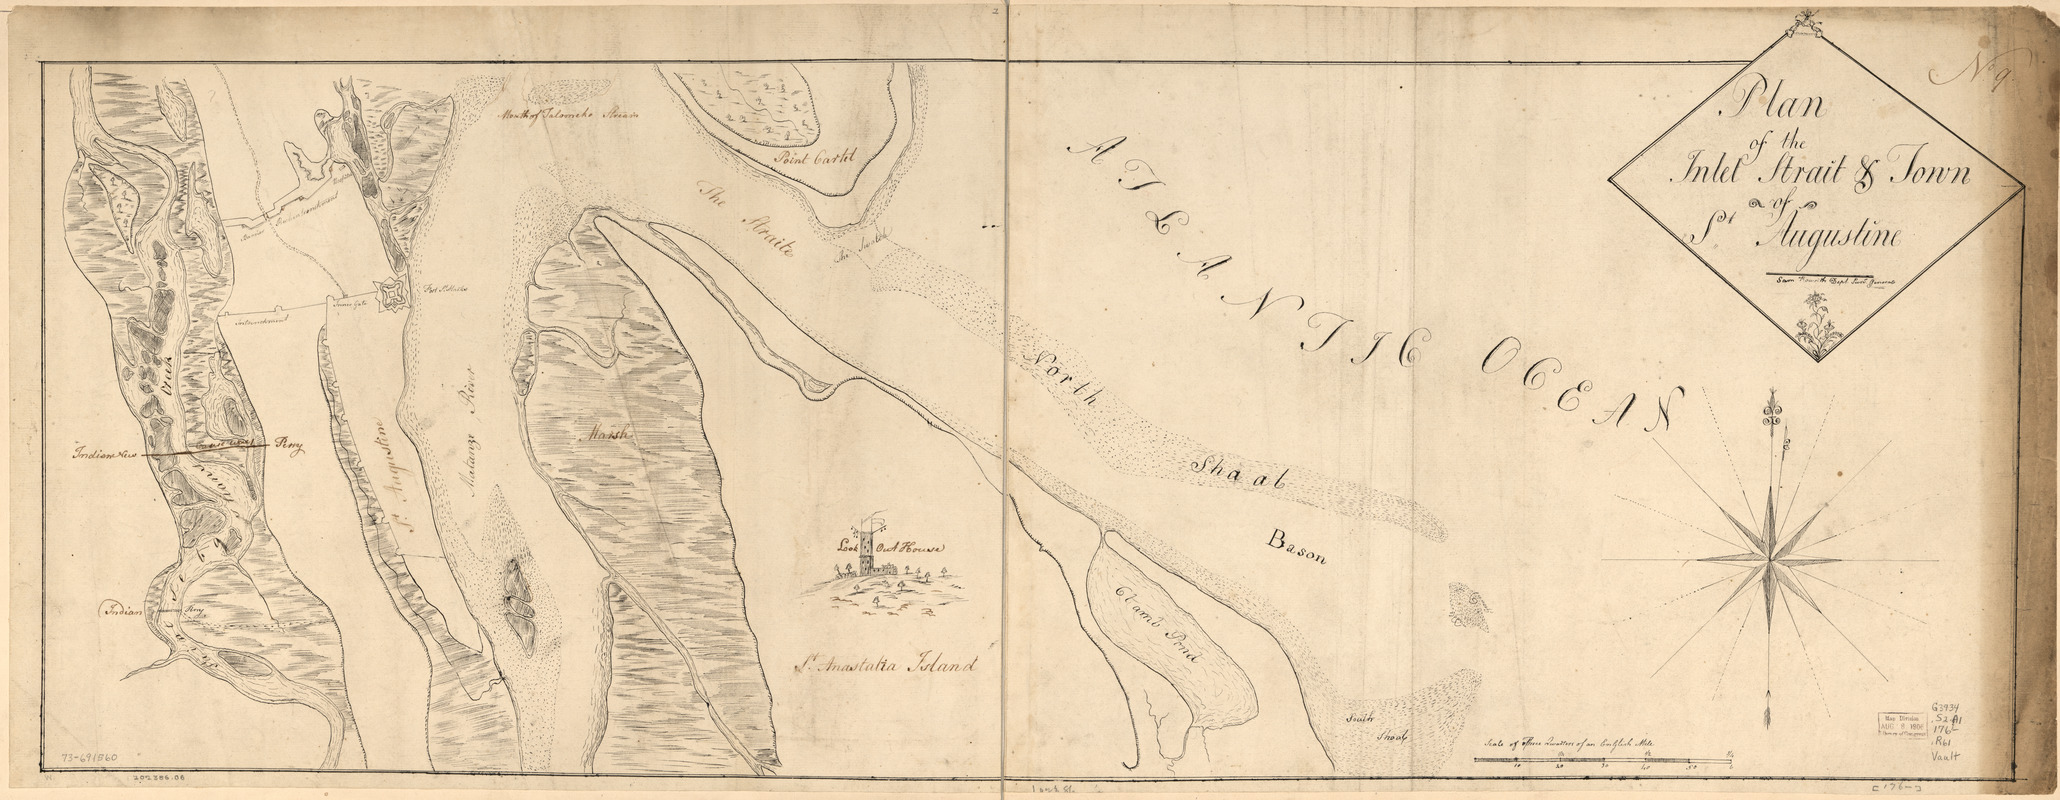 Plan of the inlet, strait, & town of St. Augustine